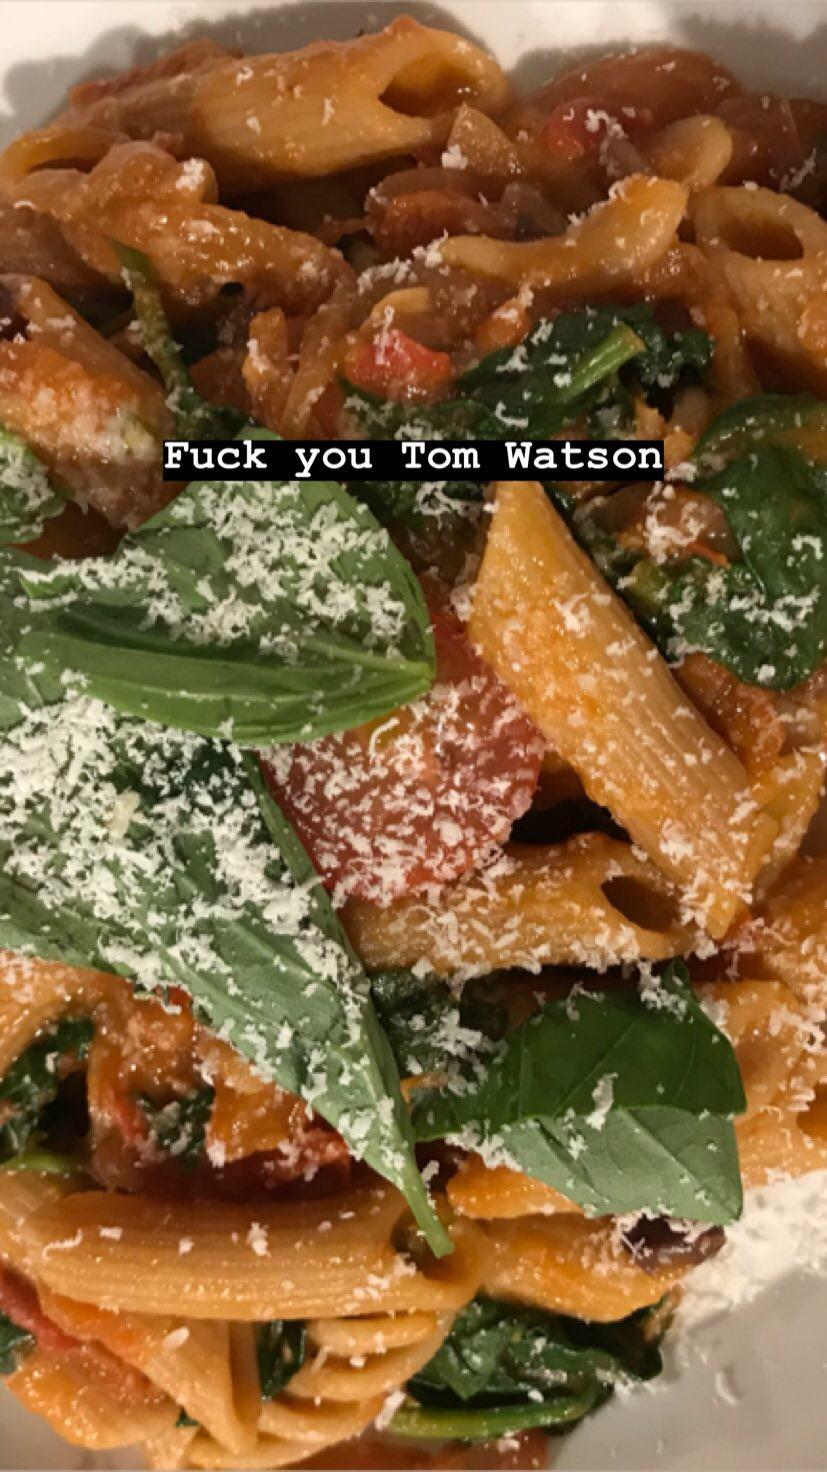 Tom Watson carbohydrates